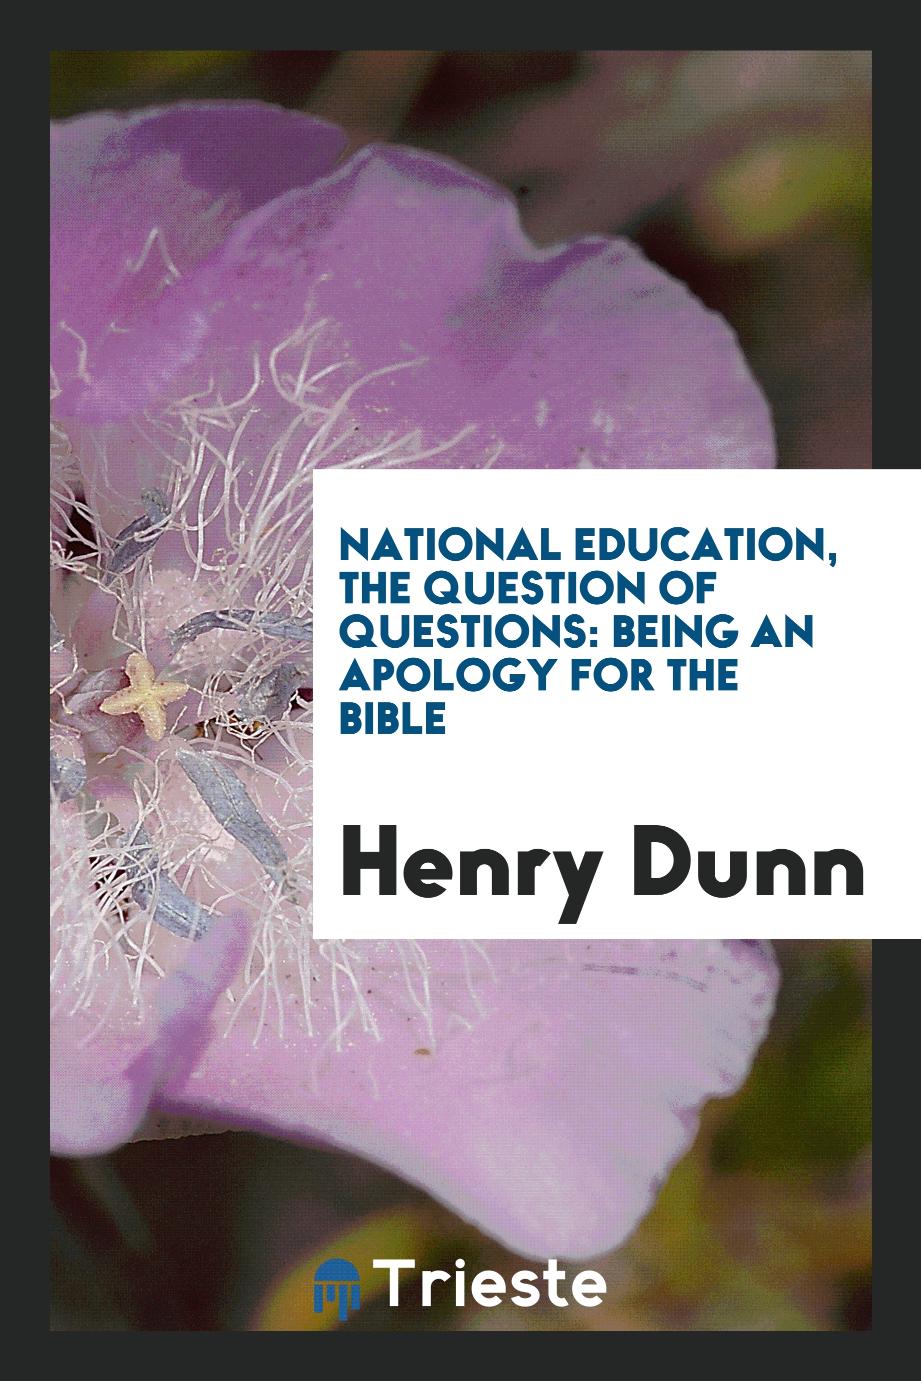 National Education, the Question of Questions: Being an Apology for the bible